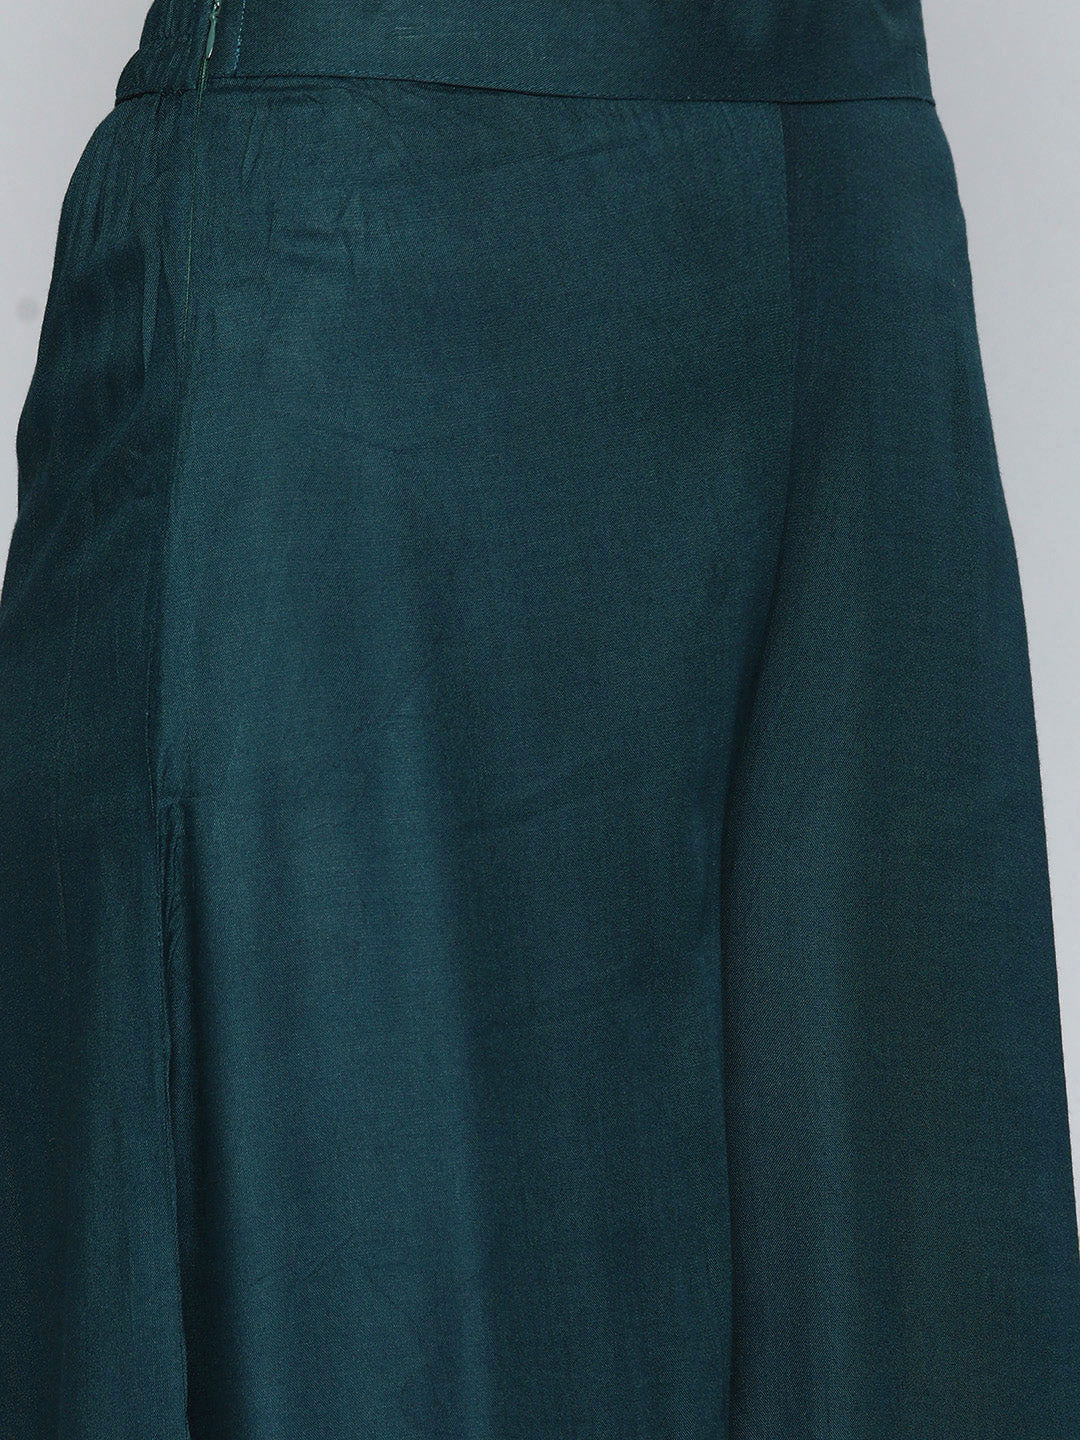 Teal Sequinned Kurta with Palazzos & With Dupatta